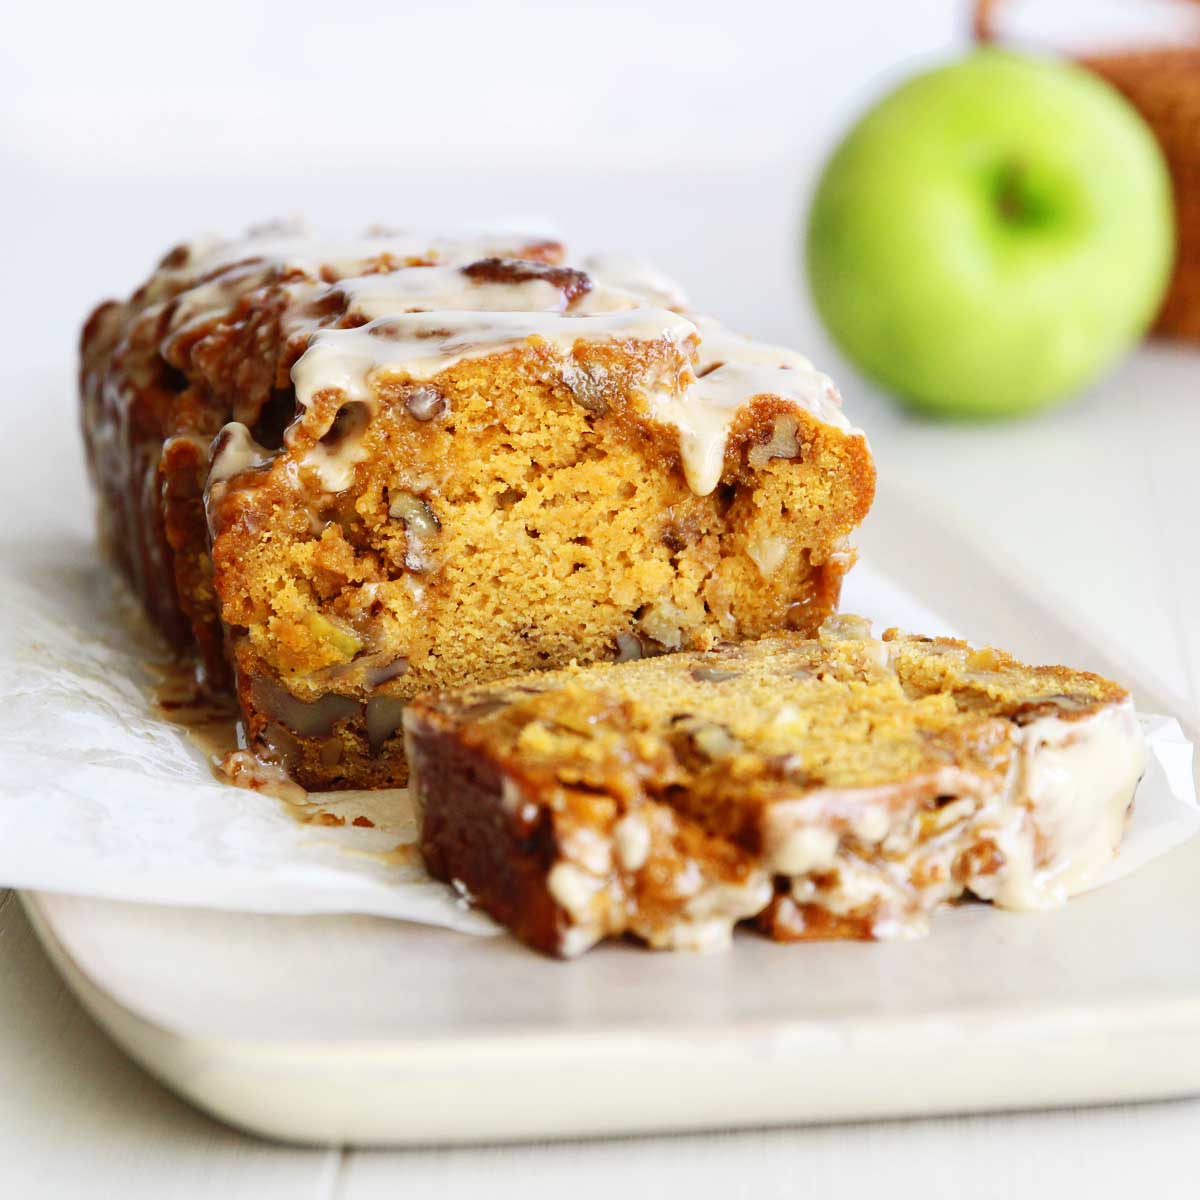 Country Apple Pumpkin Bread with Maple Glaze (Healthy Low Fat & Vegan) - Brown Sugar Whipped Cream